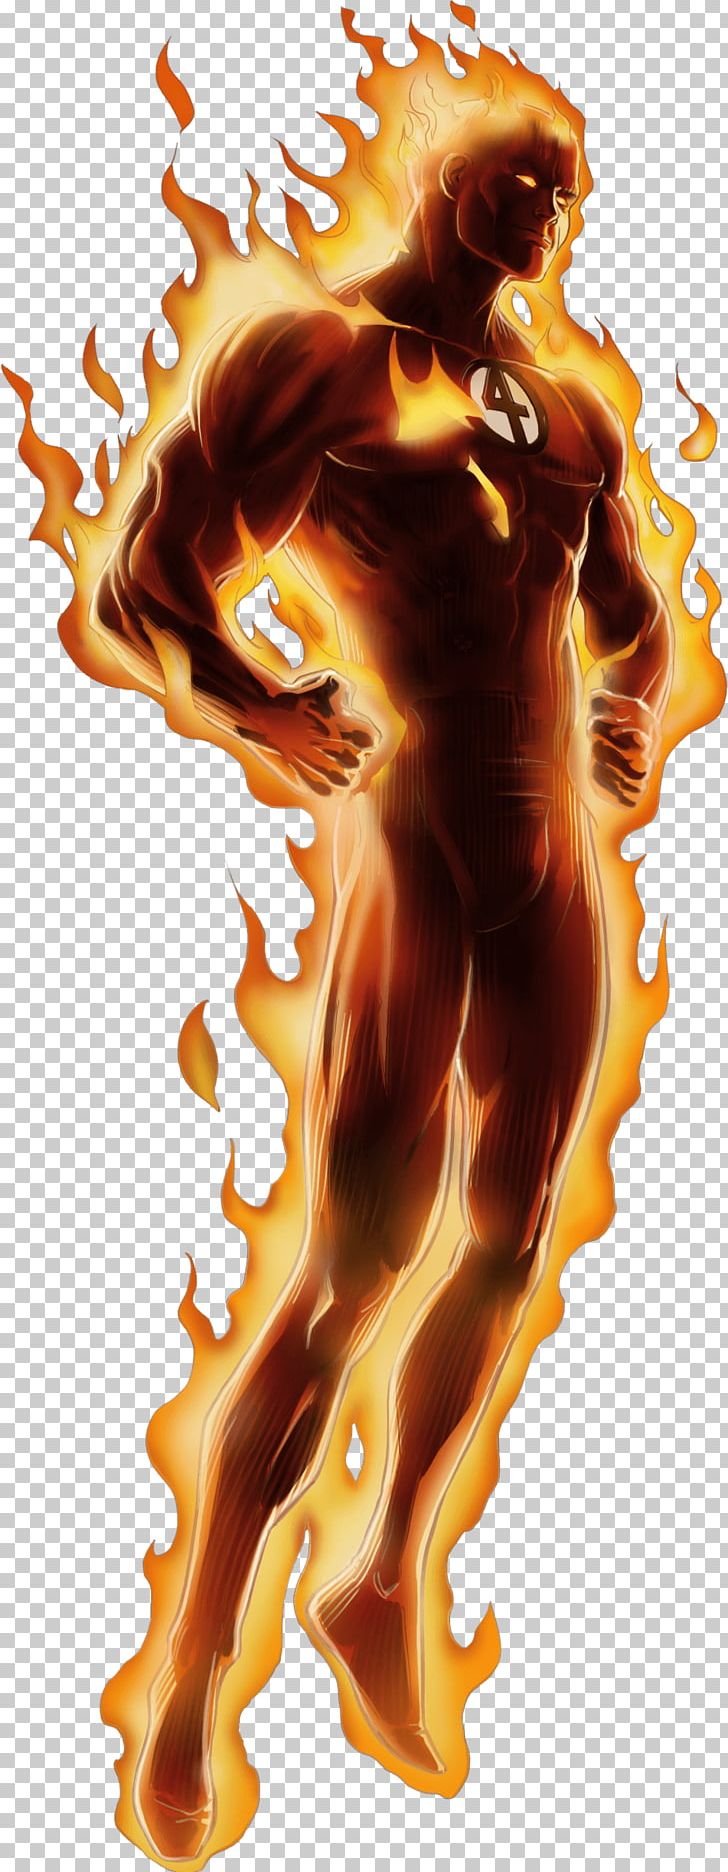 Human Torch Standing PNG, Clipart, Comics, Fantasy, Human Torch Free PNG Download